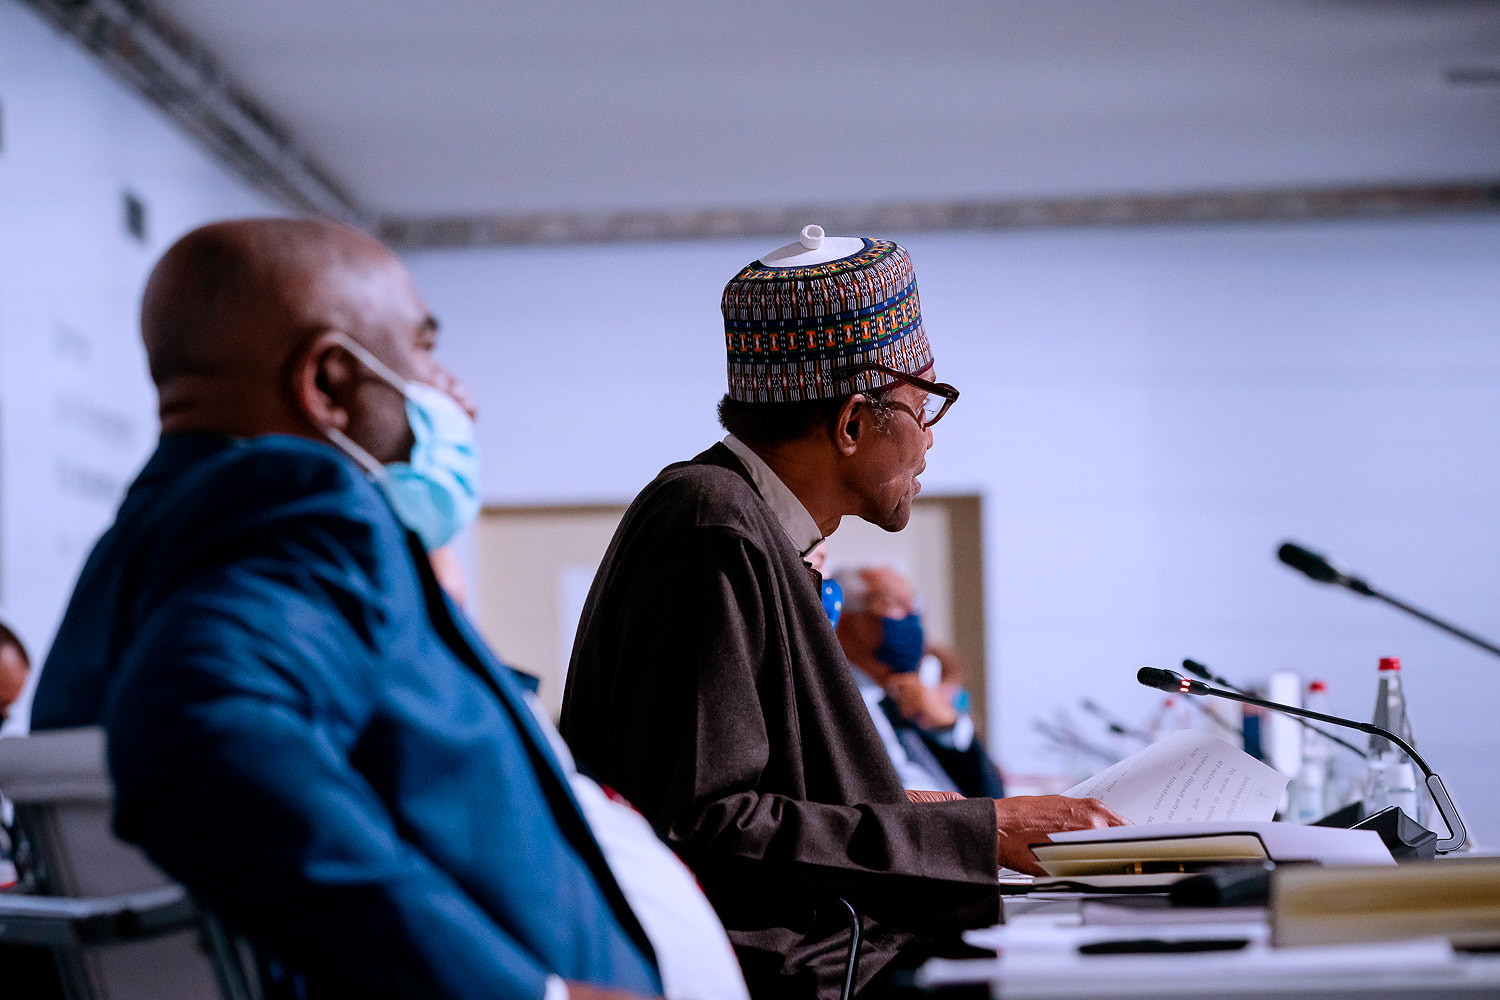 President Buhari speaks at African Financial Summit in Paris, calls for debt restructuring and release of COVID19 vaccines to African nations (photos)